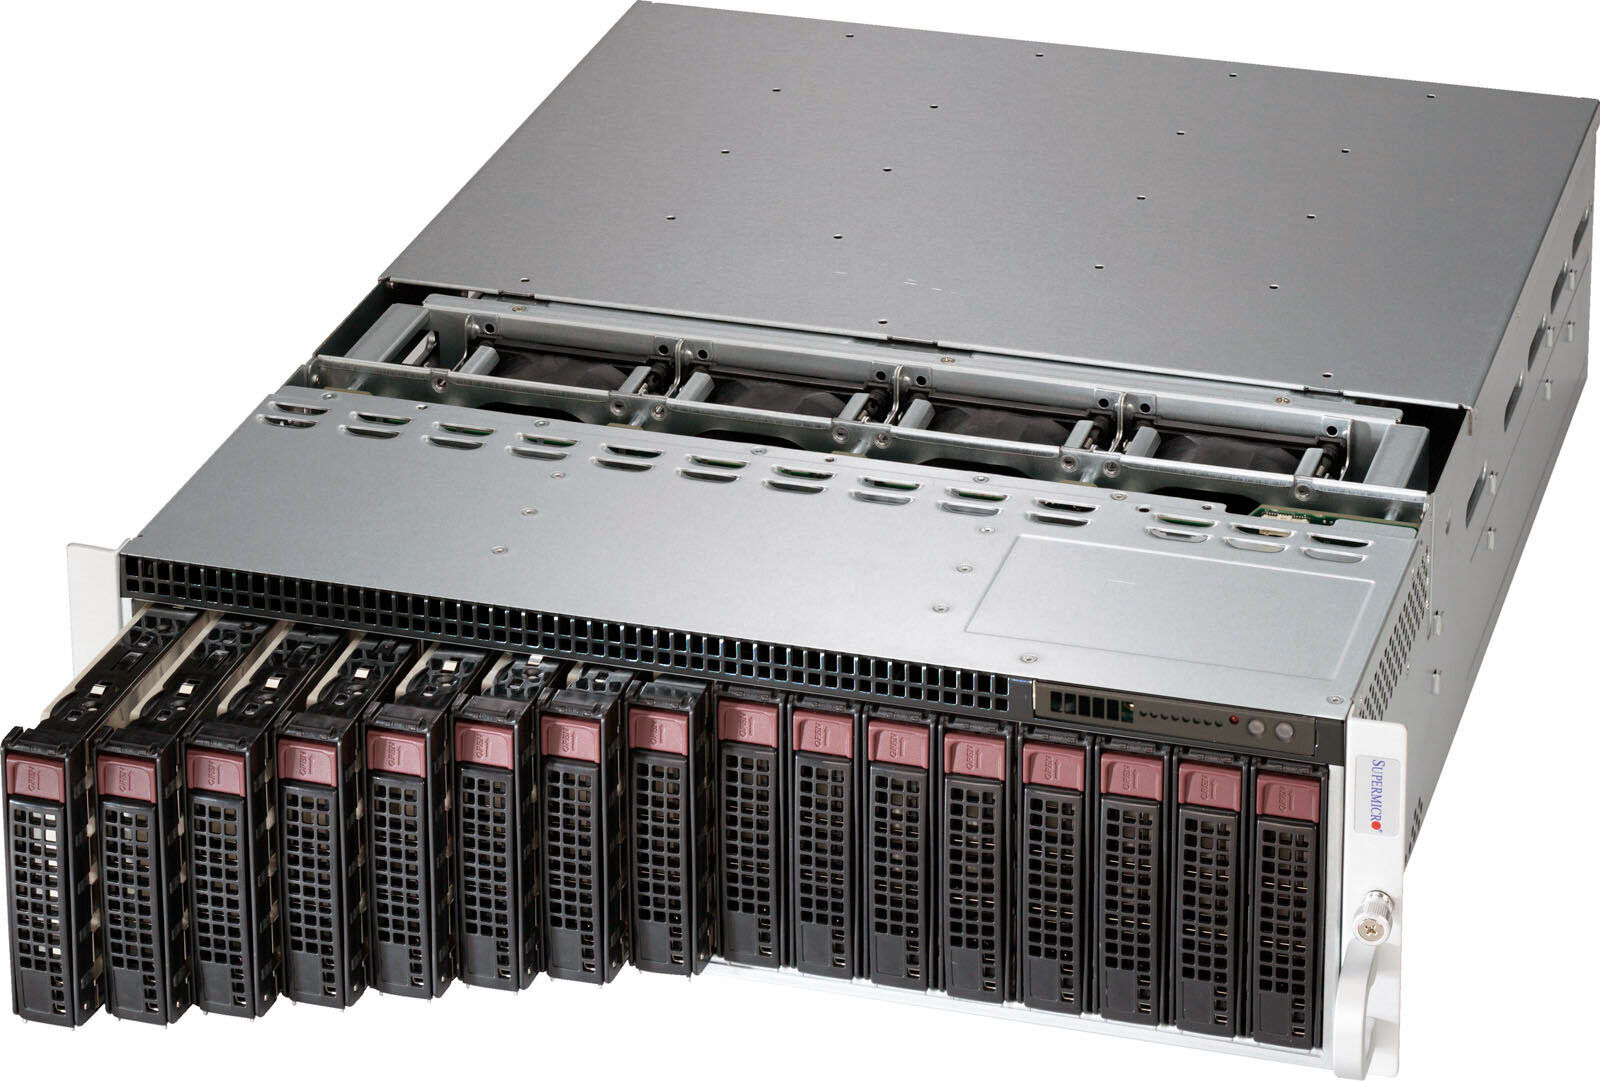 Supermicro SYS-5037MR-H8TRF MicroCloud Barebones Server NEW IN STOCK 5 Year Wty